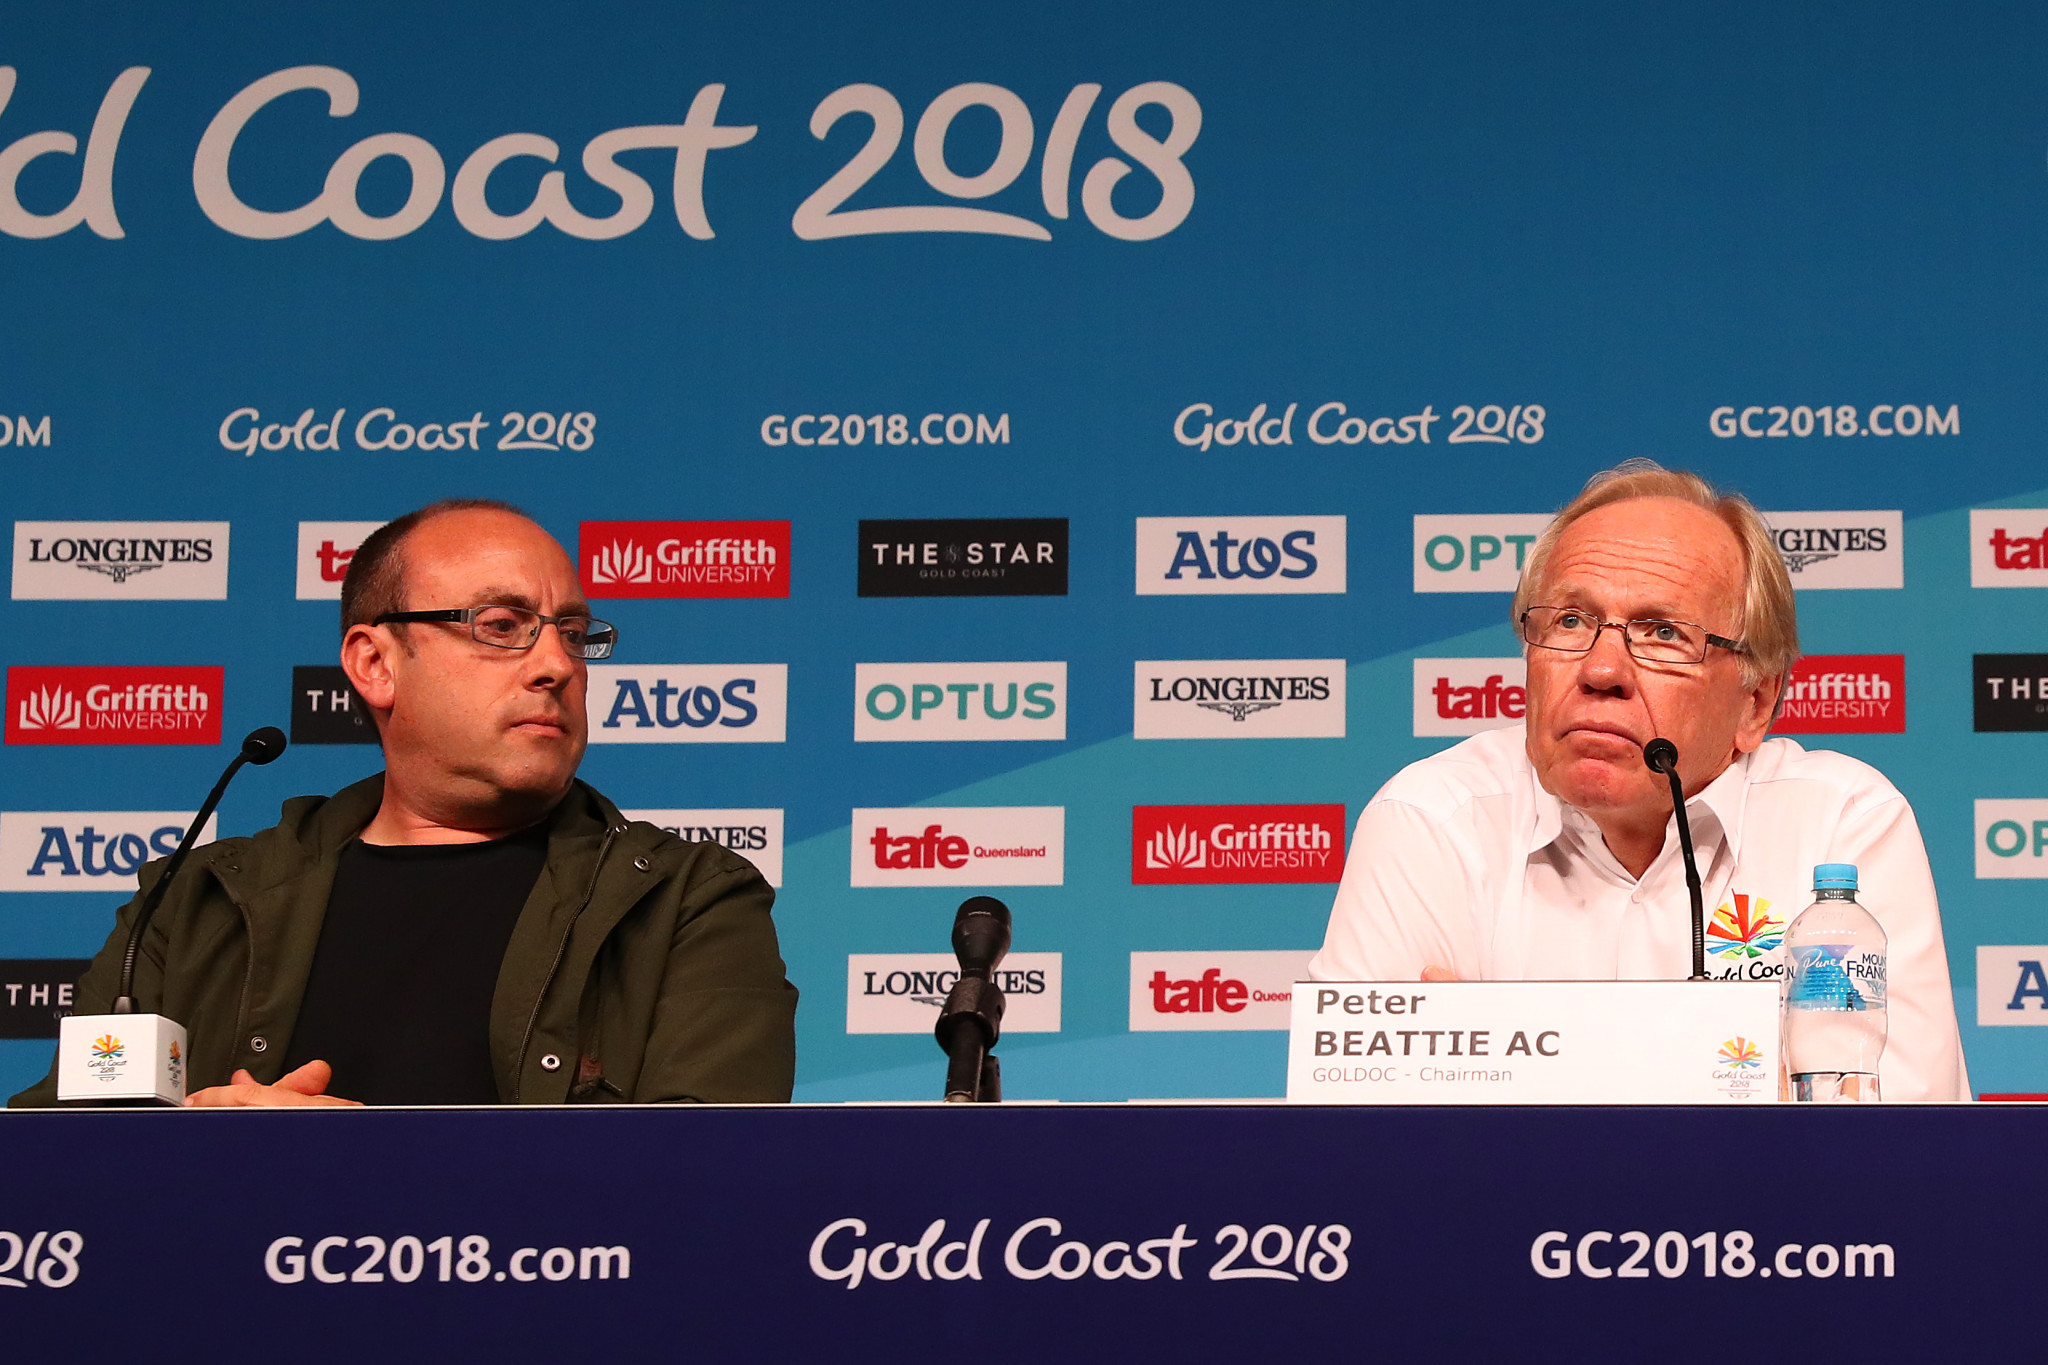 Peter Beattie believes his reputation will be forever damaged by the Gold Coast 2018 Closing Ceremony ©Getty Images